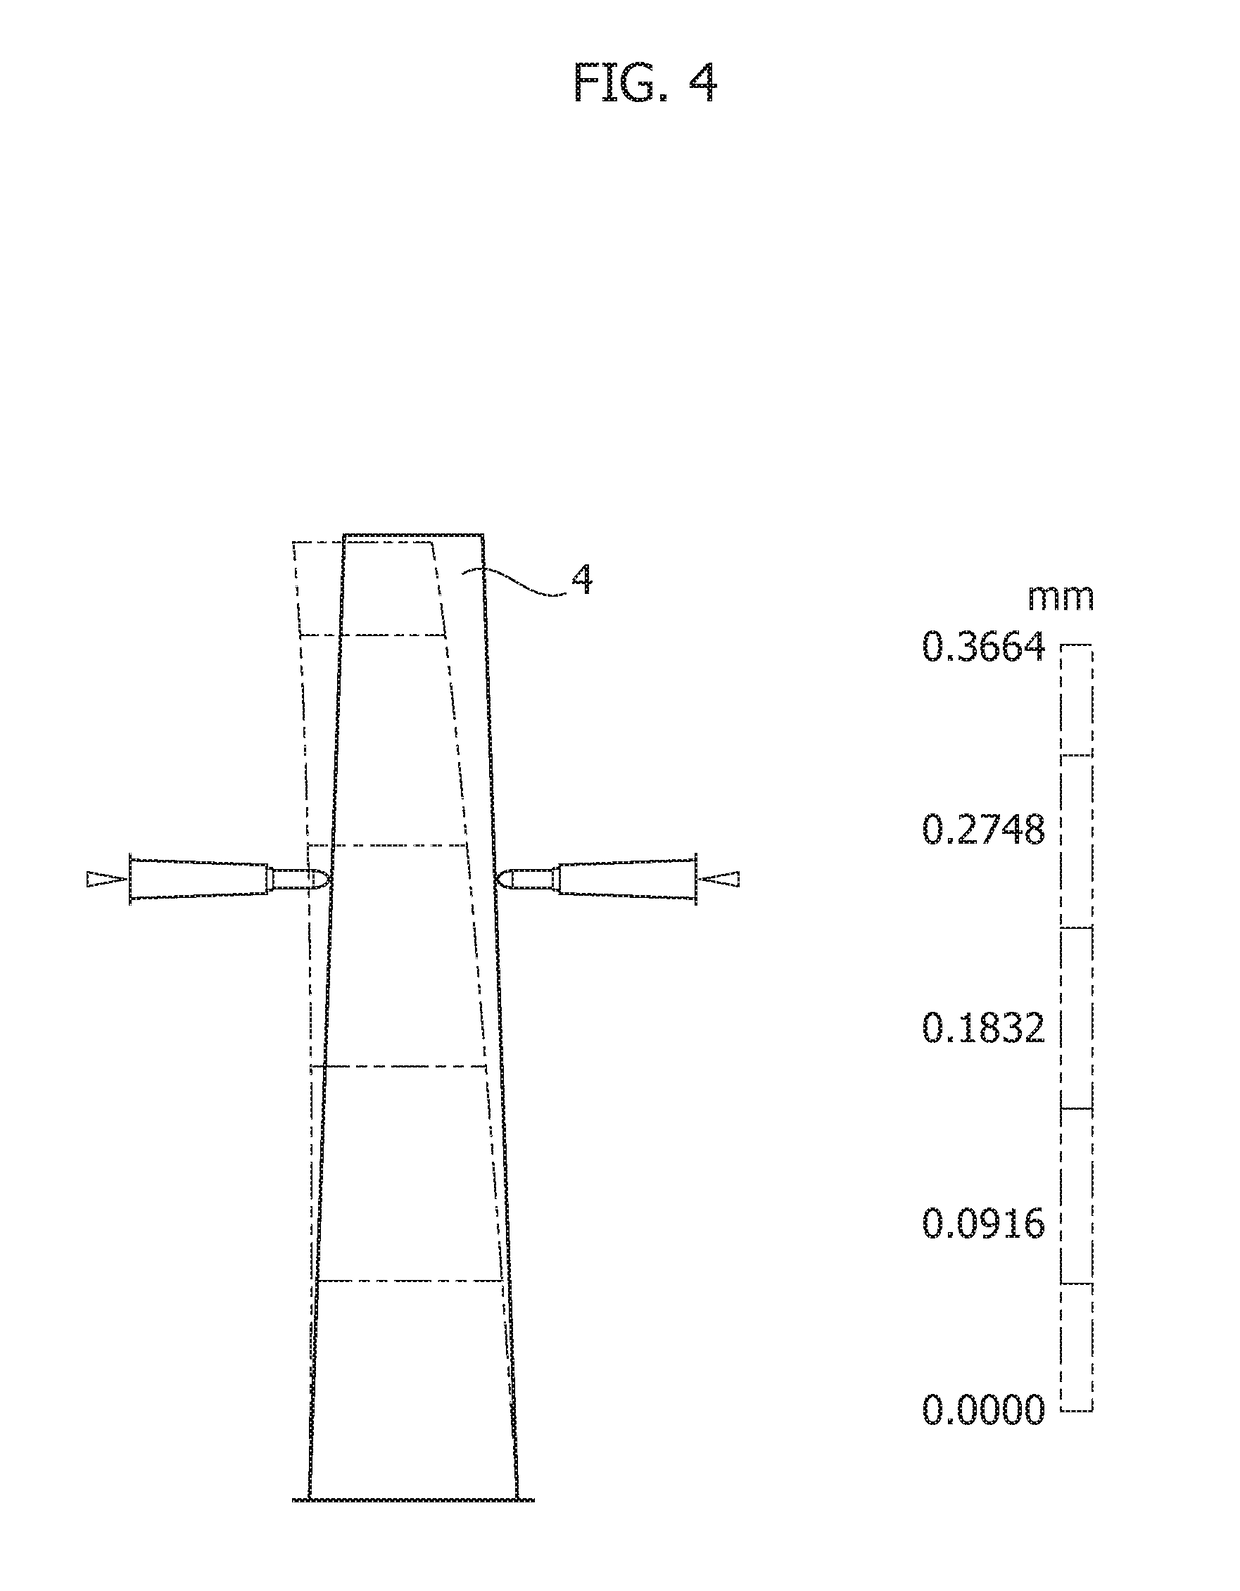 Method and apparatus for producing hollow articles made of injection moulded plastic material